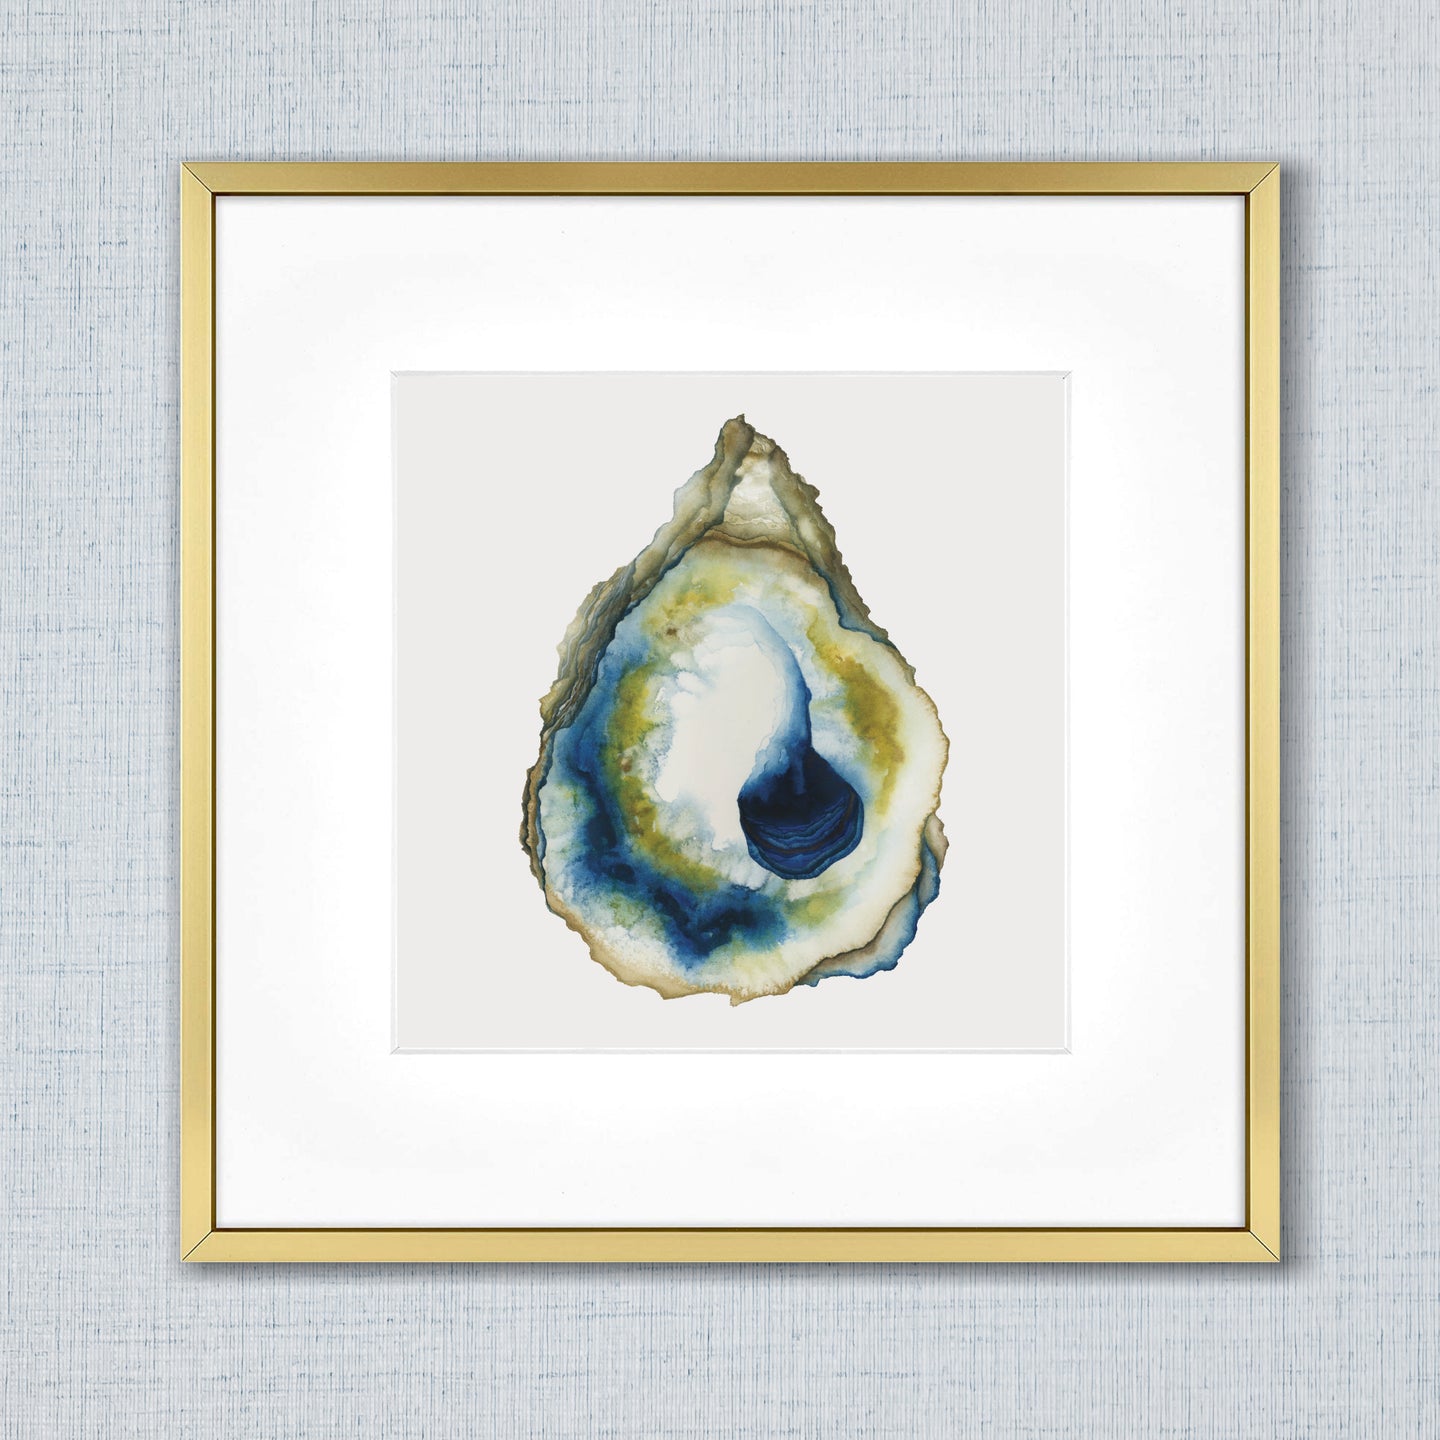 “Southern State of Mind” Fine Art Print - Oyster (2020)